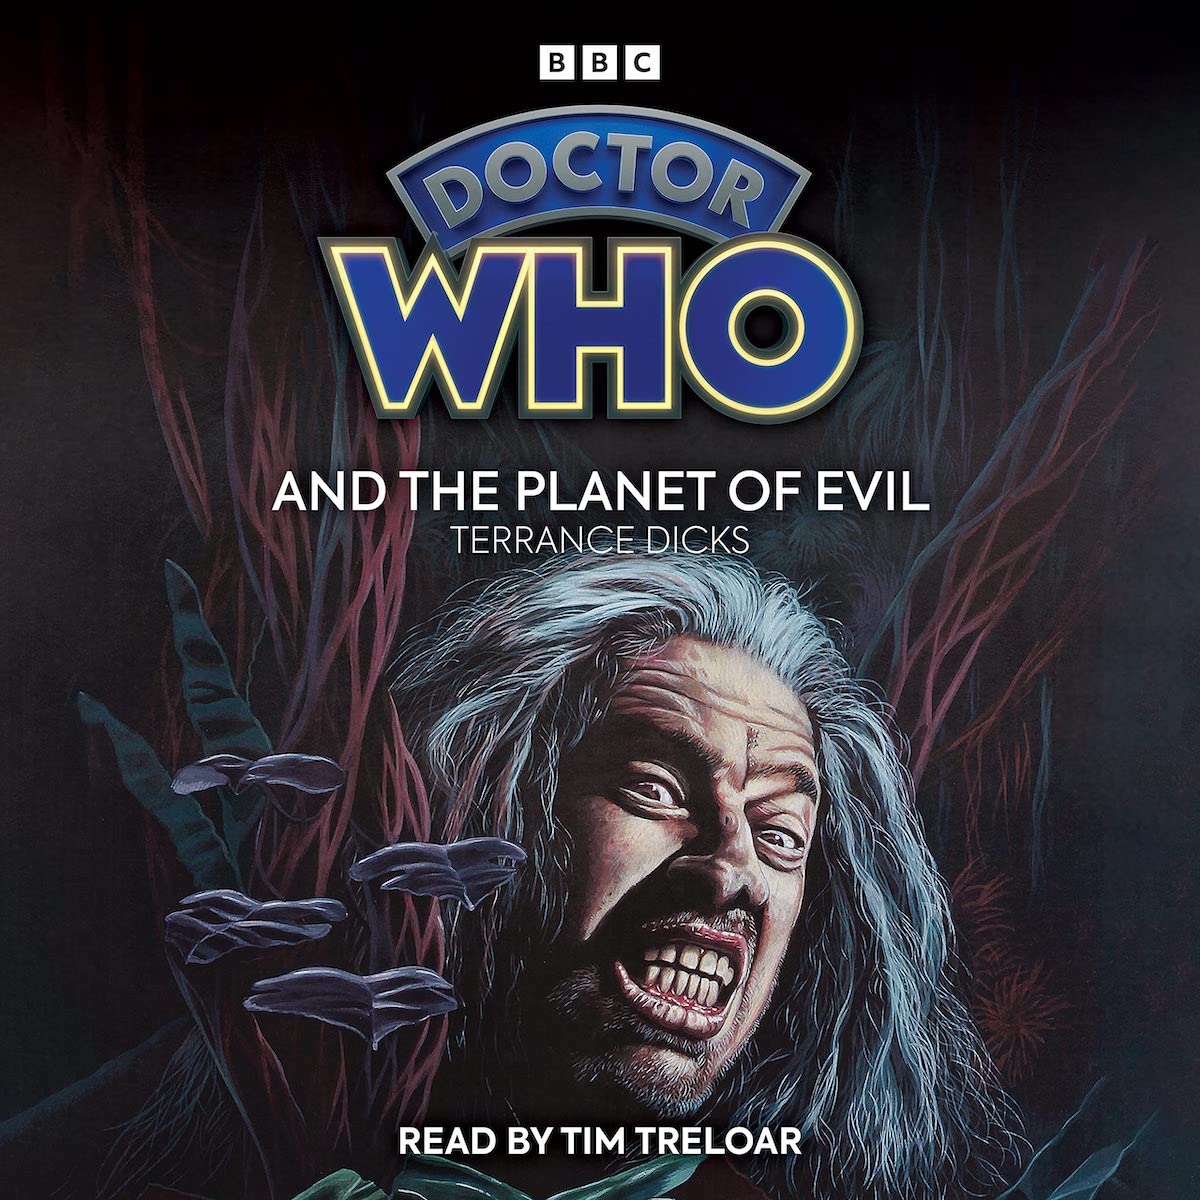 Doctor Who and the Planet of Evil novel reading